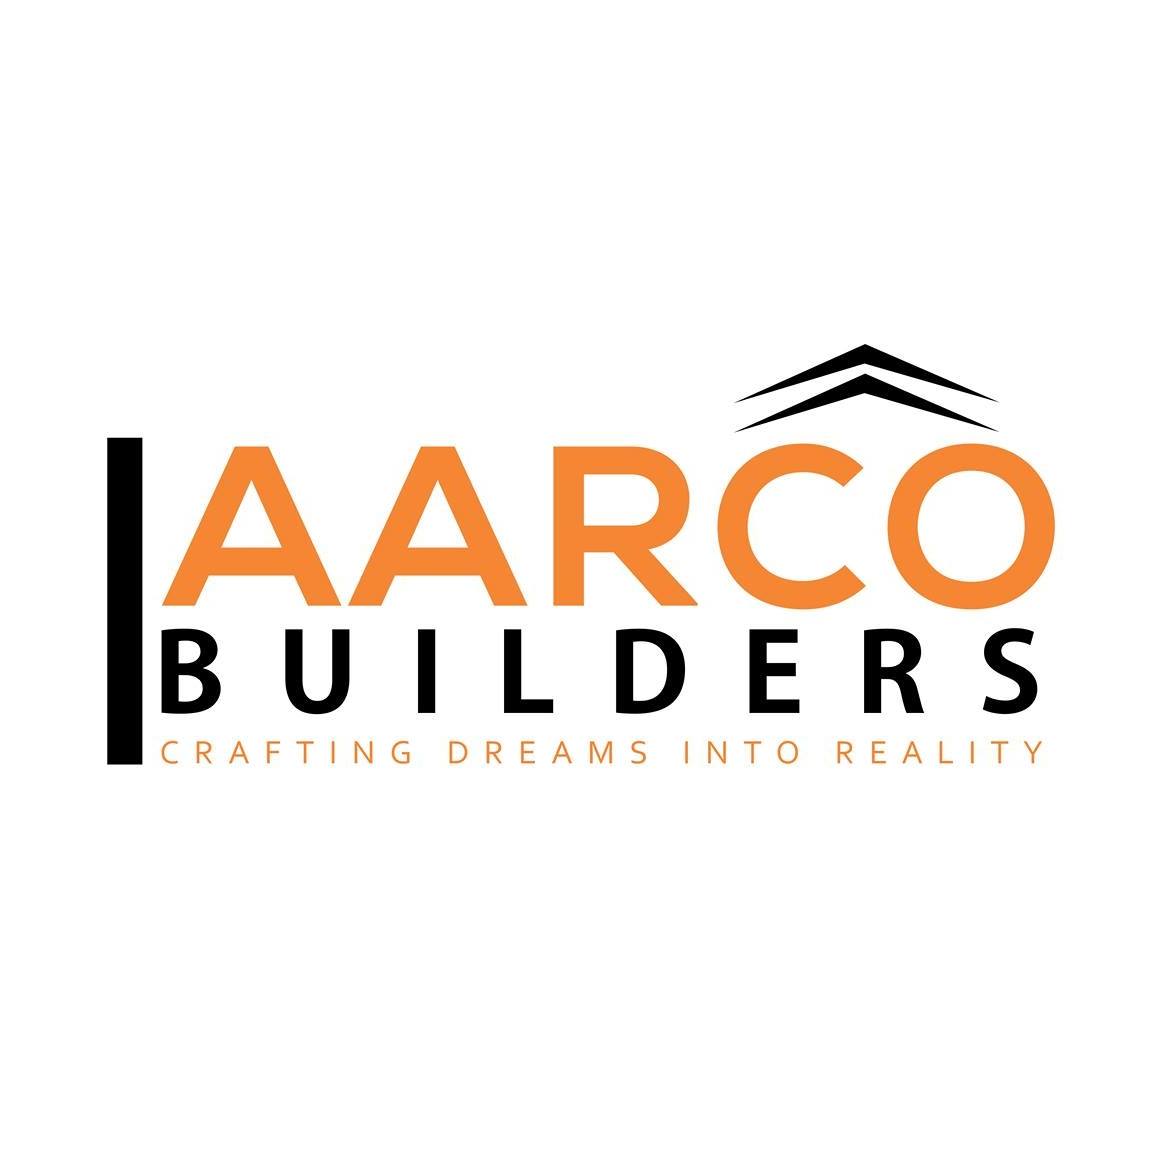 AARCO BUILDERS|Architect|Professional Services